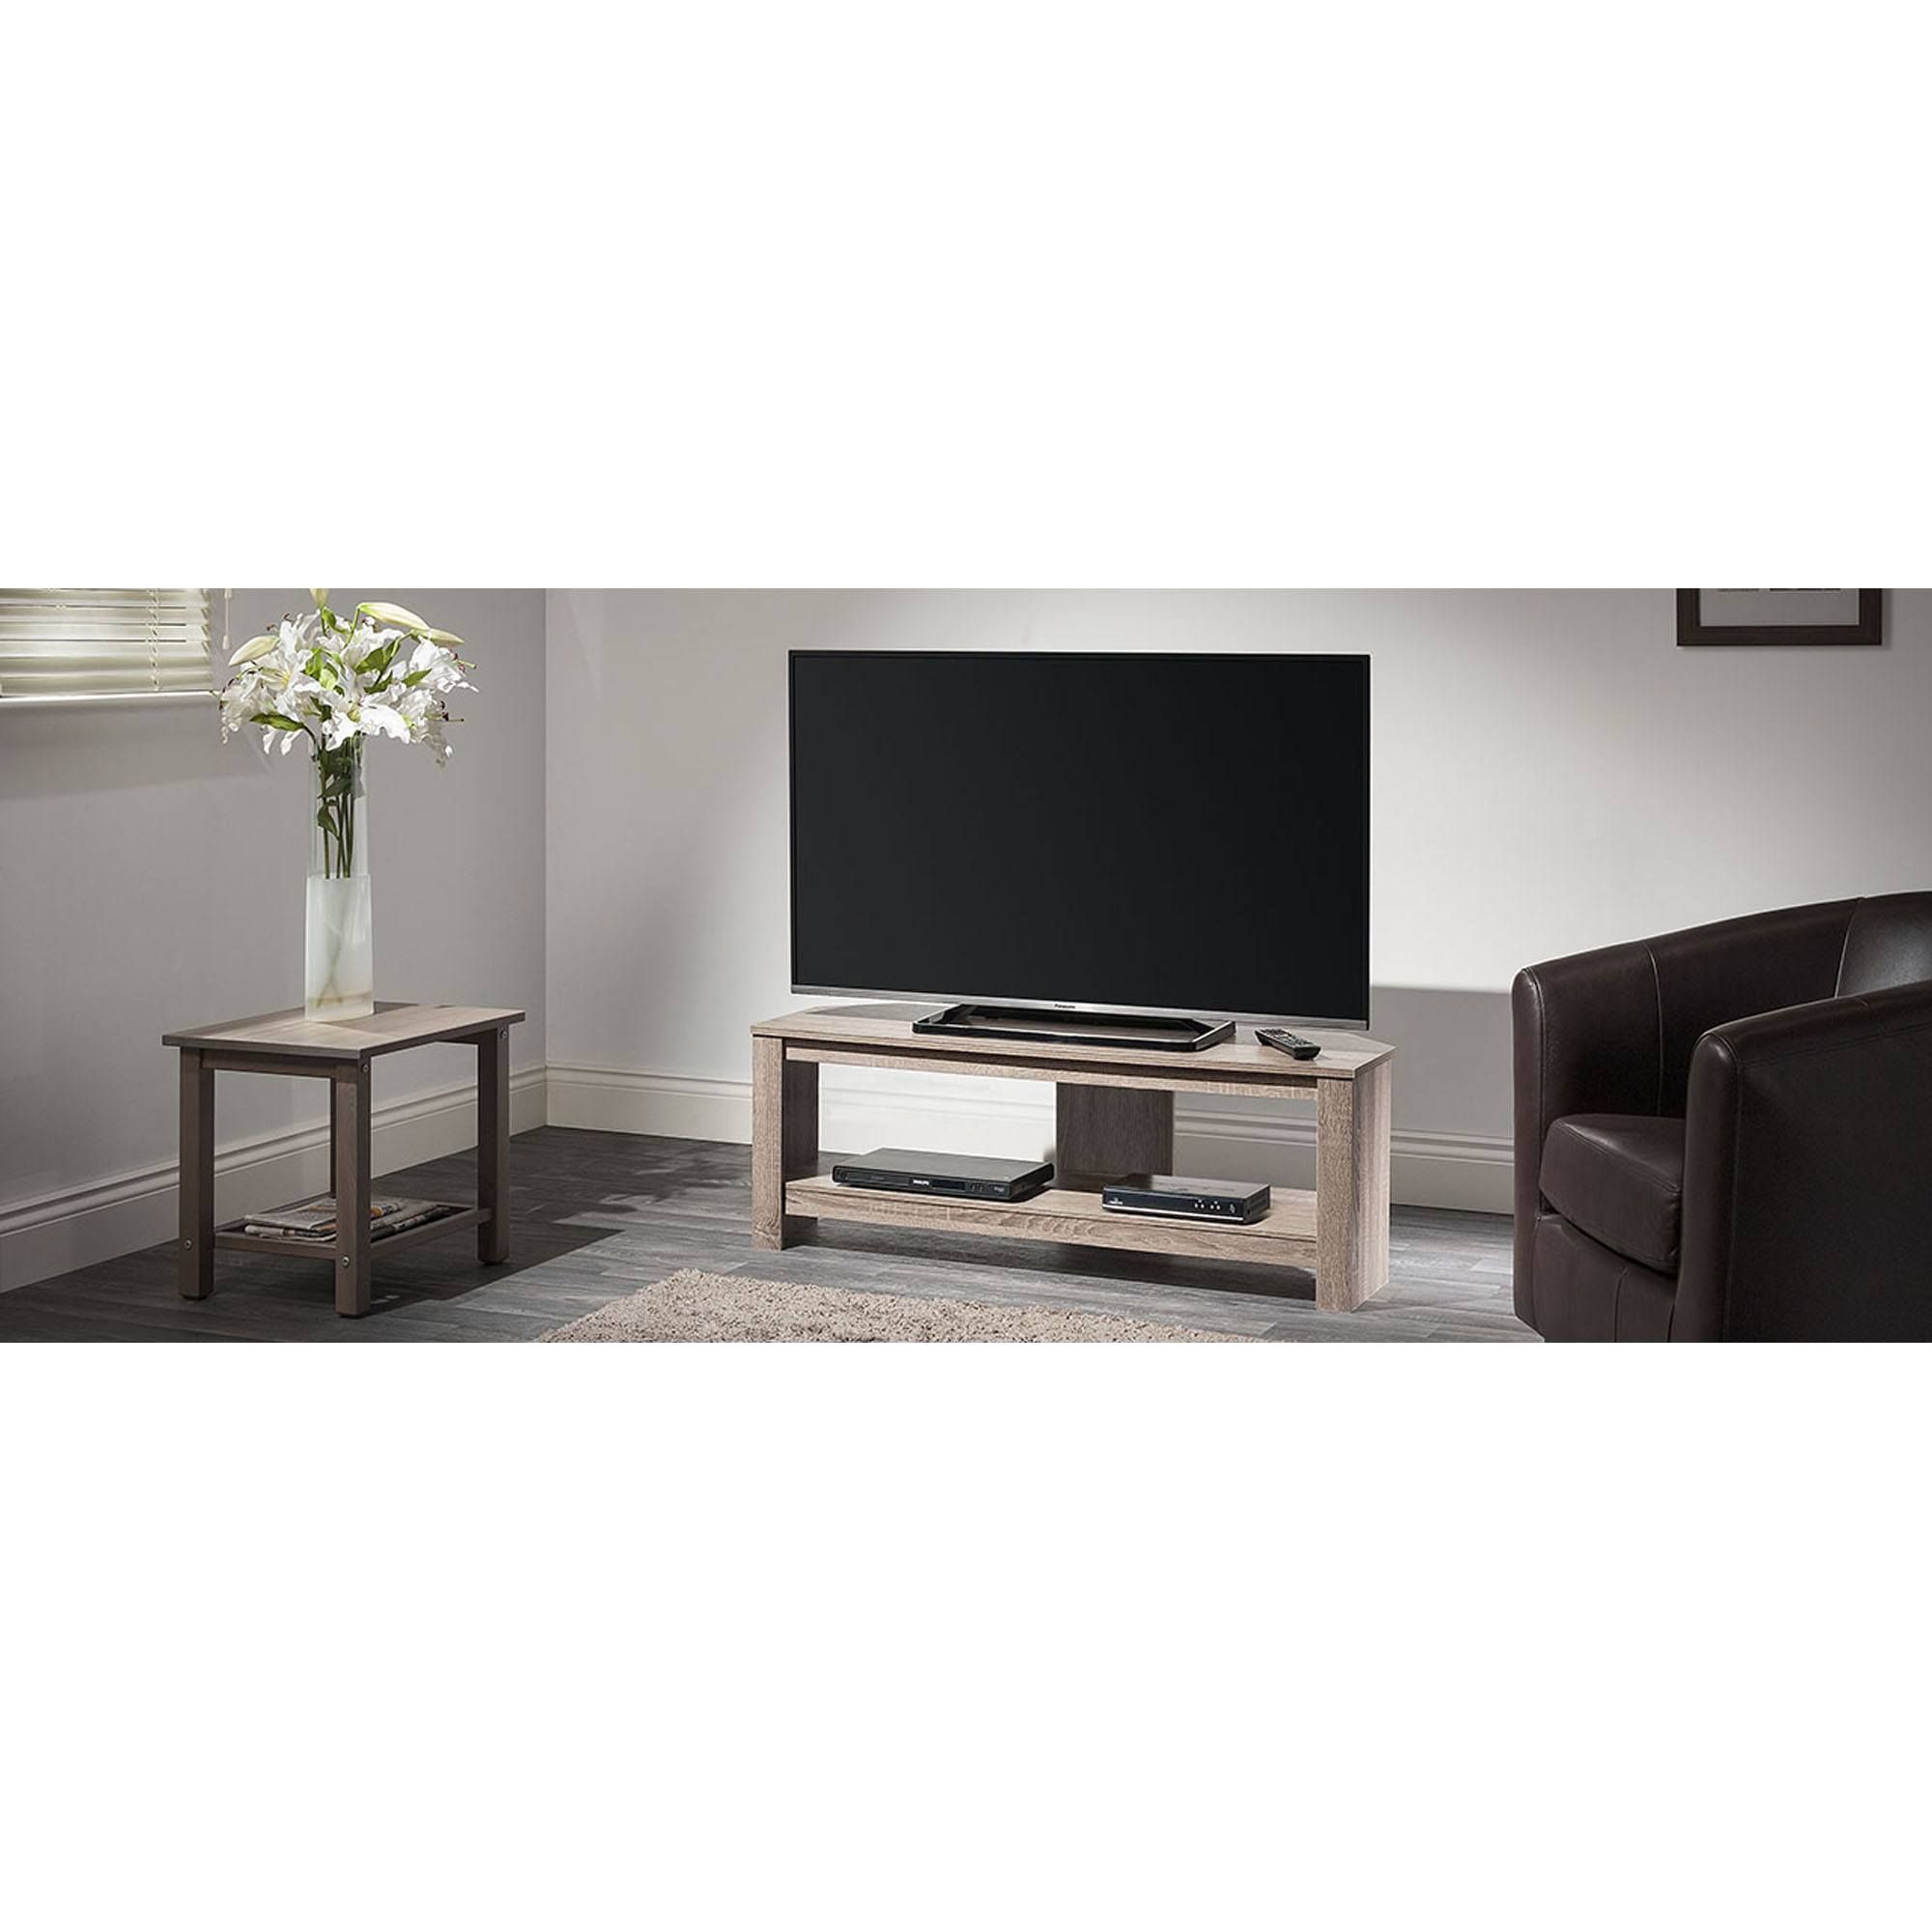 Tech Link Calibre Corner Tv Stand For Up To 55" | Hughes Within Spellman Tv Stands For Tvs Up To 55" (Photo 9 of 15)